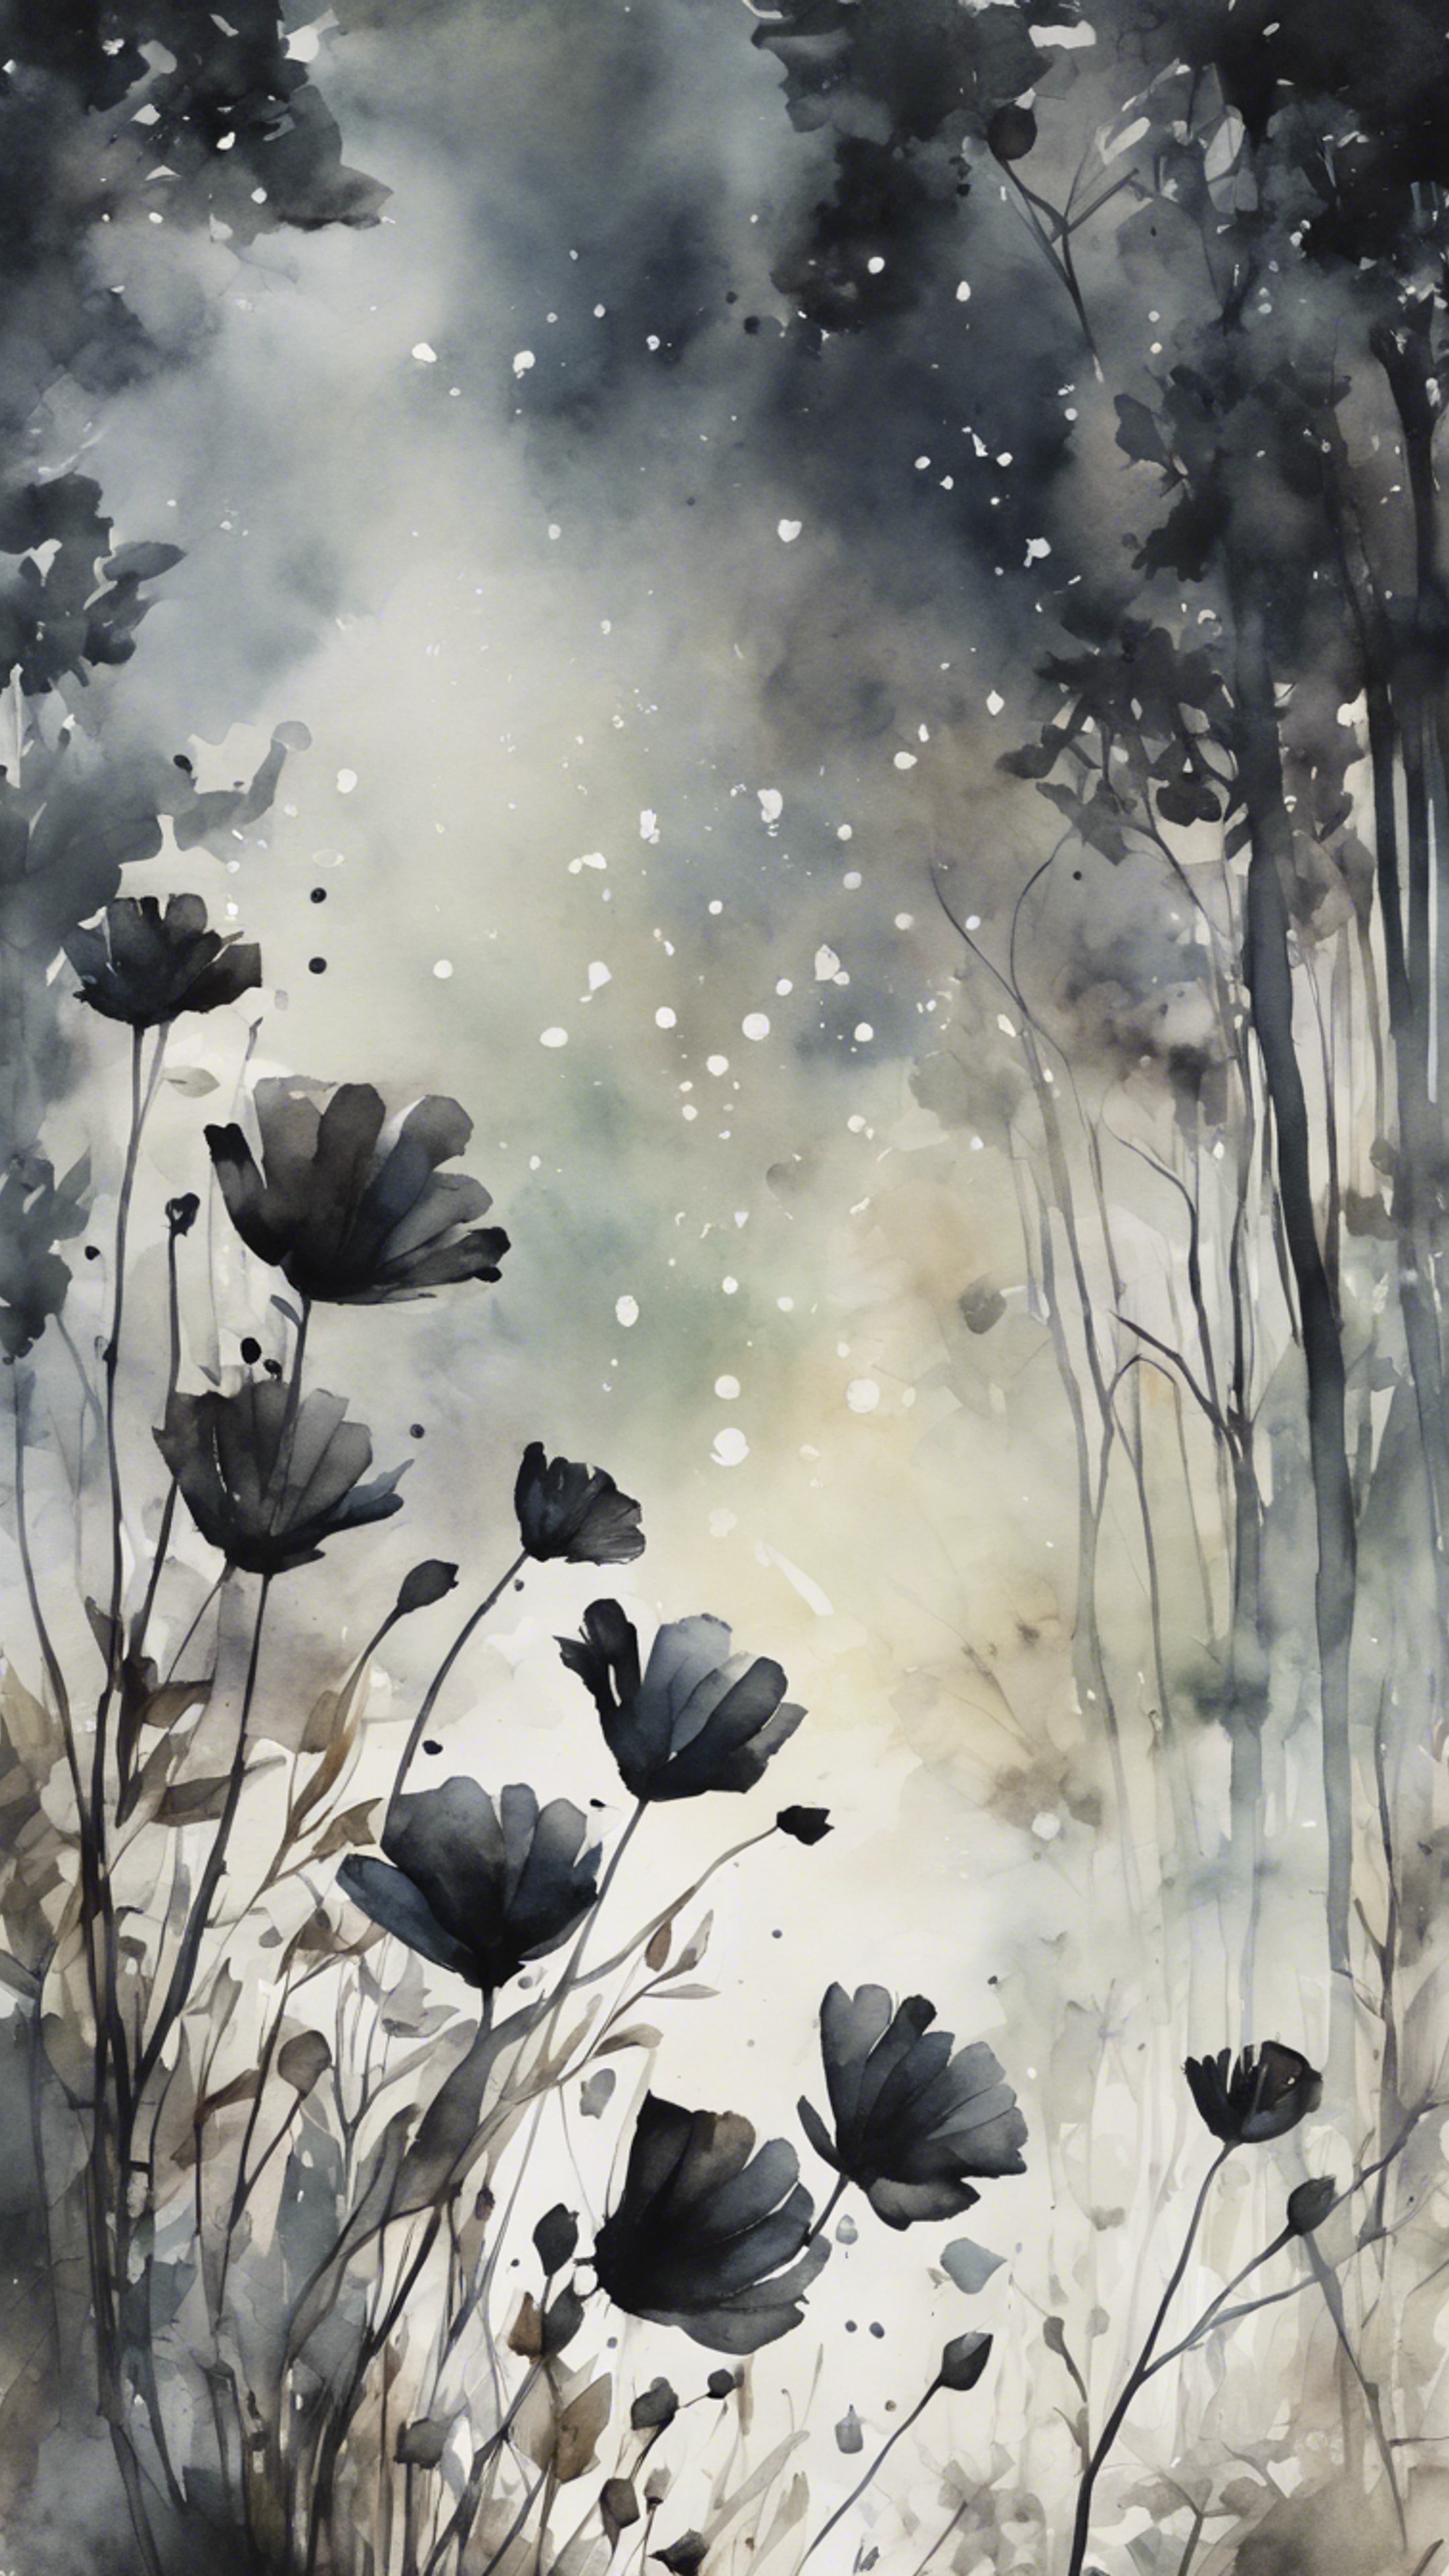 A dreamy watercolor painting depicting black flowers blooming in the heart of a dense forest. Обои[006f57e6dd8144ebb2db]